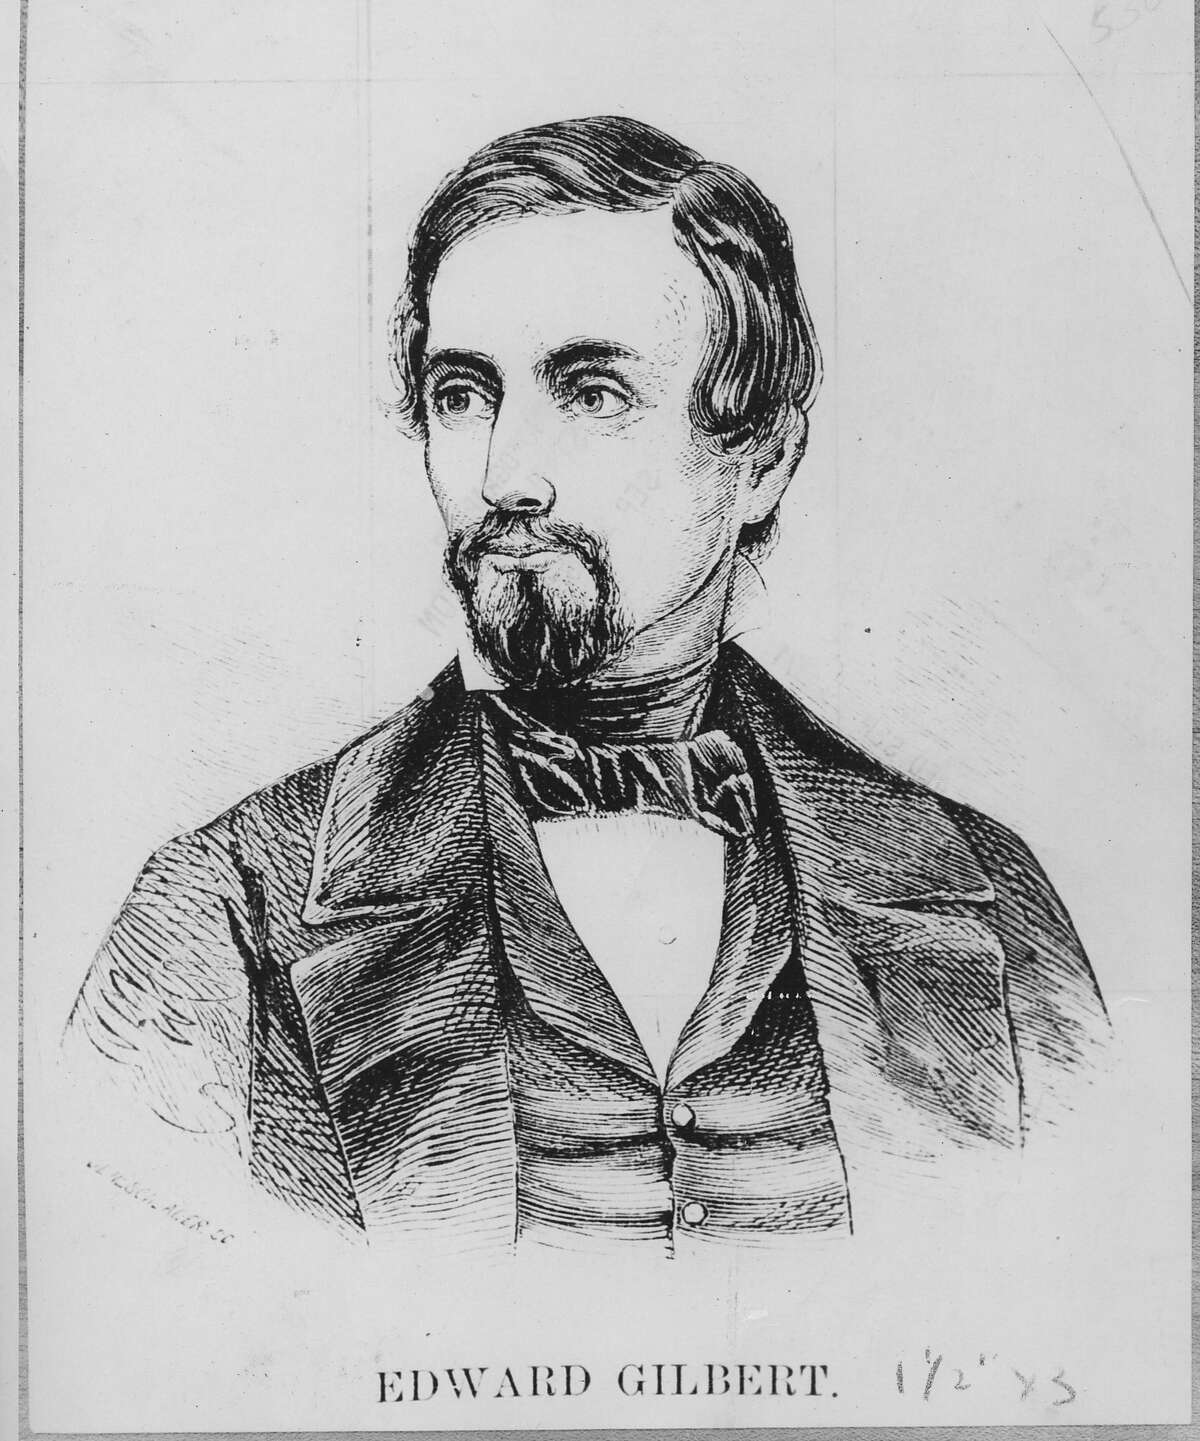 Edward Gilbert, San Francisco journalist who would be shot and killed in a duel with James W. Denver in the 1850s. Handout photo